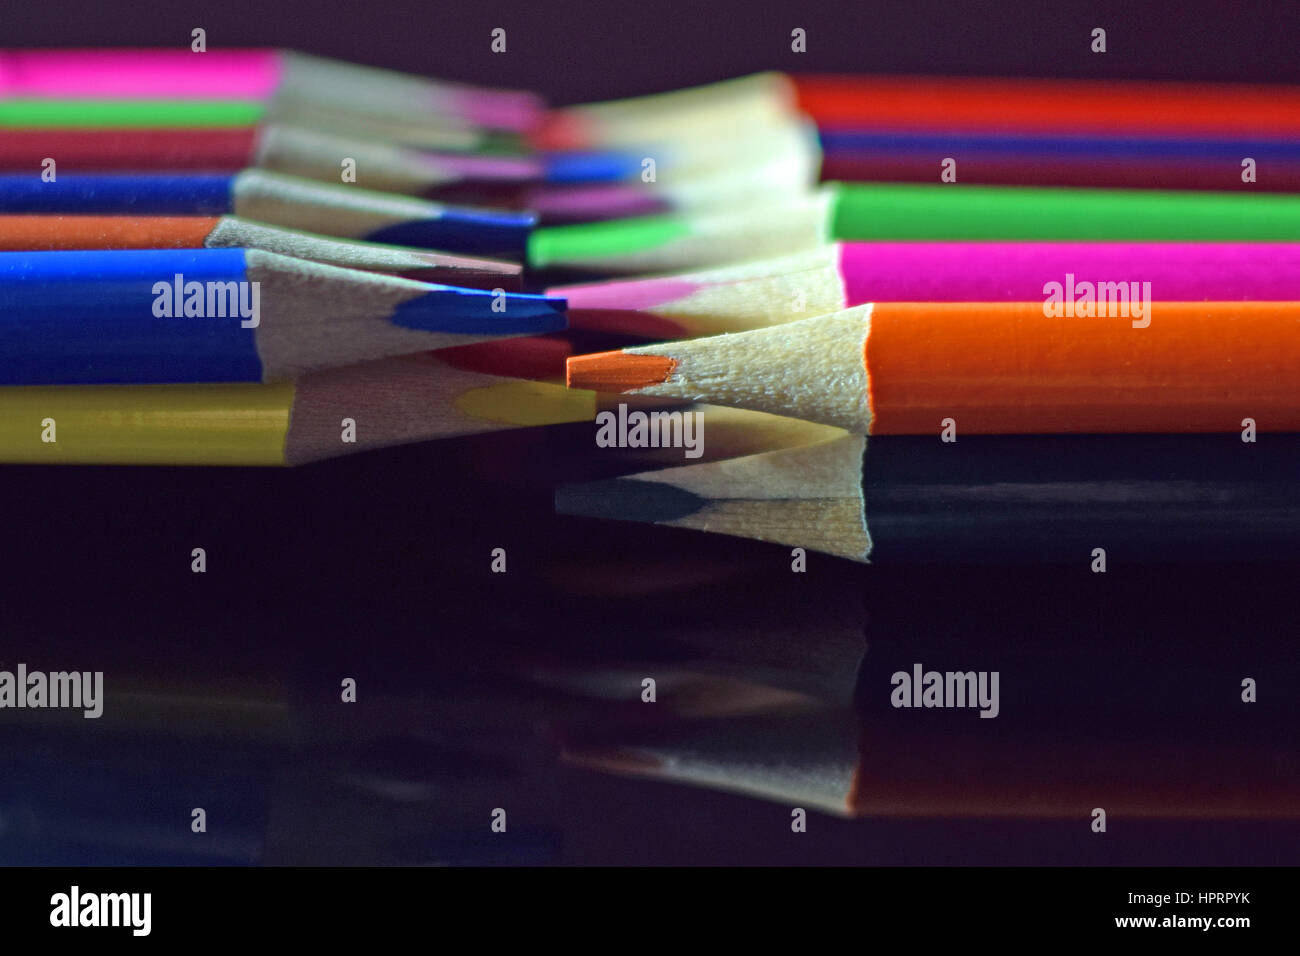 Close up of colored pencils on black reflective surface. Stock Photo